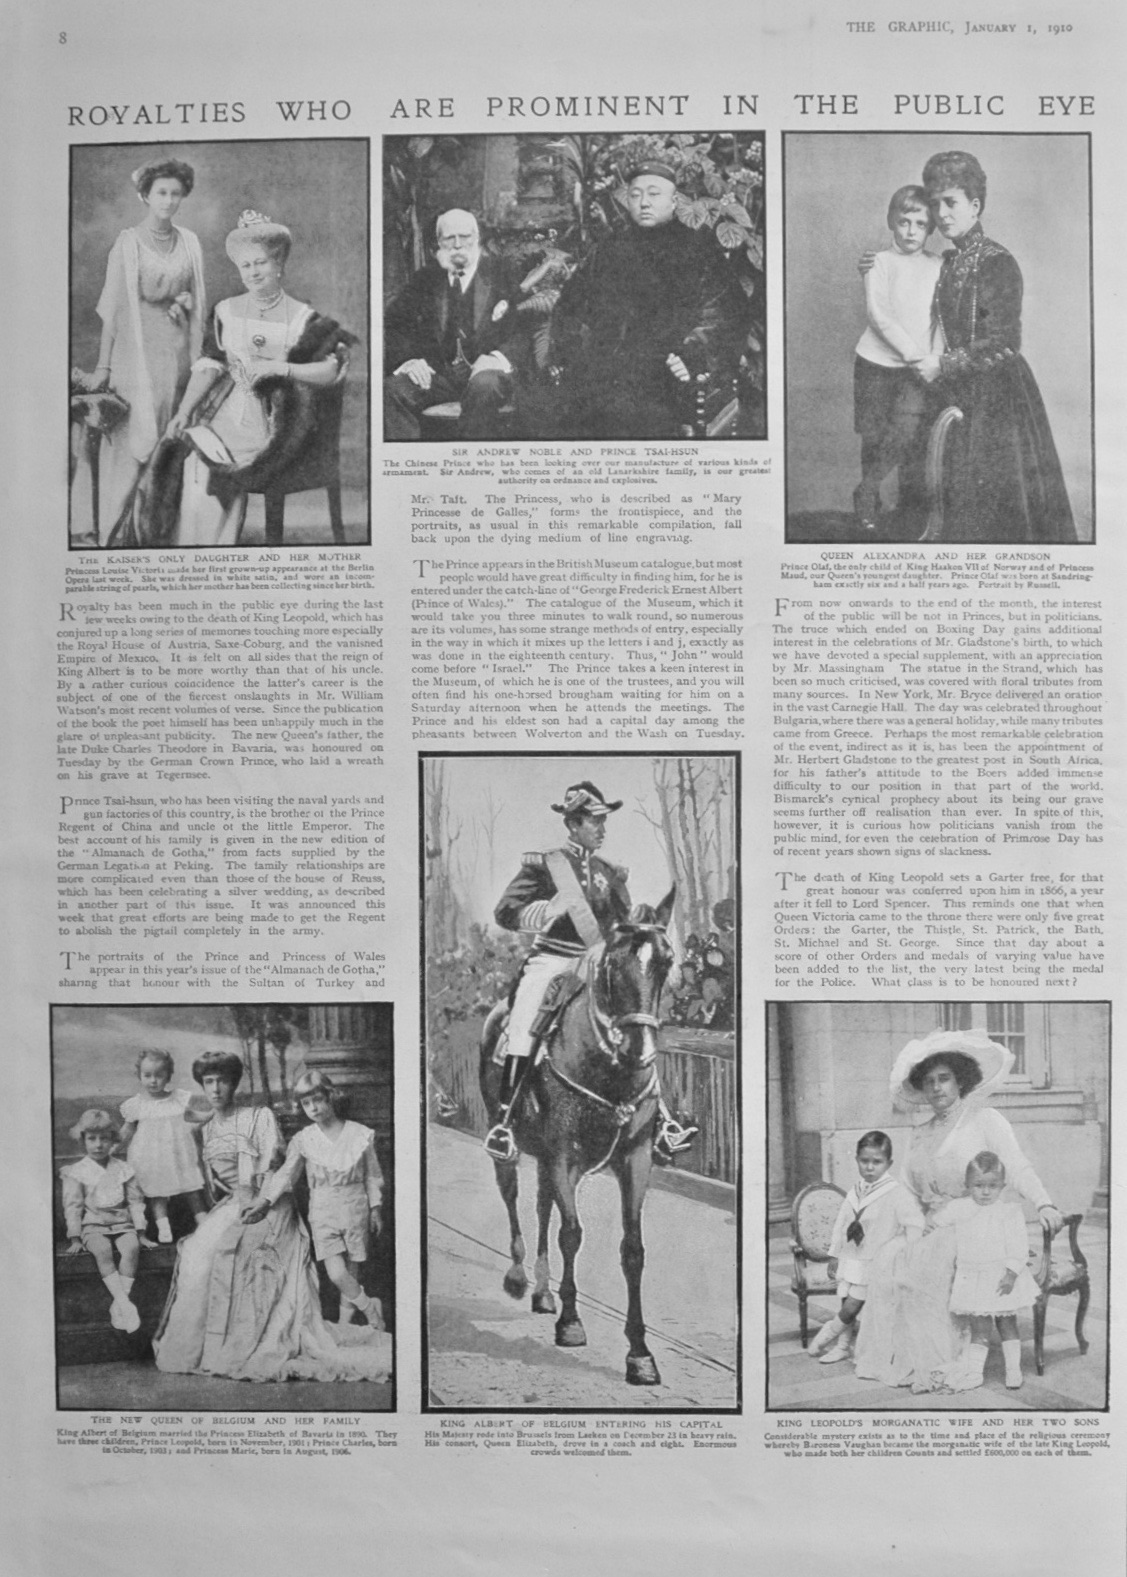 Royalties who are prominent in the public eye - 1910